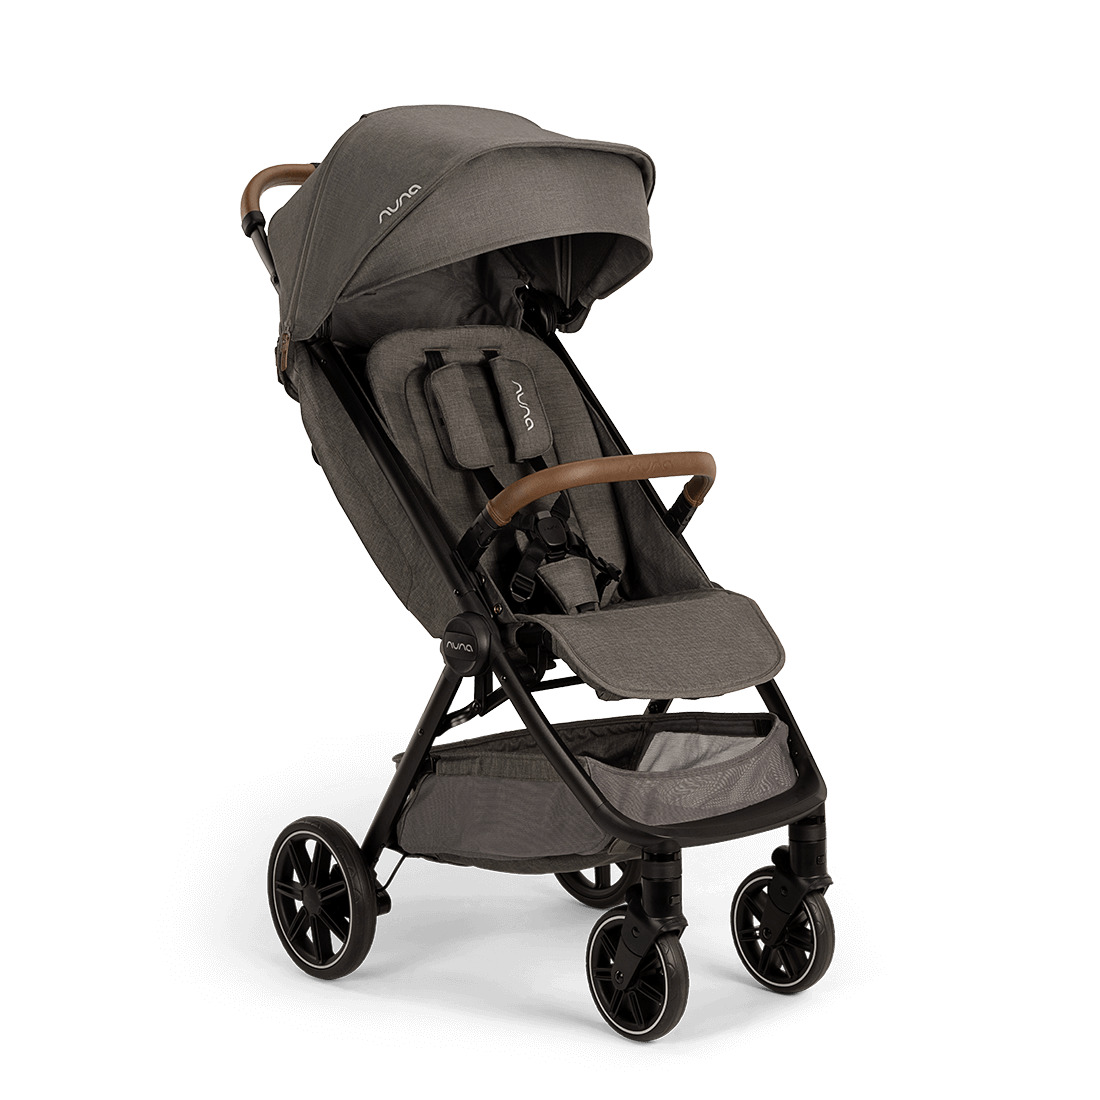 New Nuna TRVL LX available at Blossom in Granite and Caviar